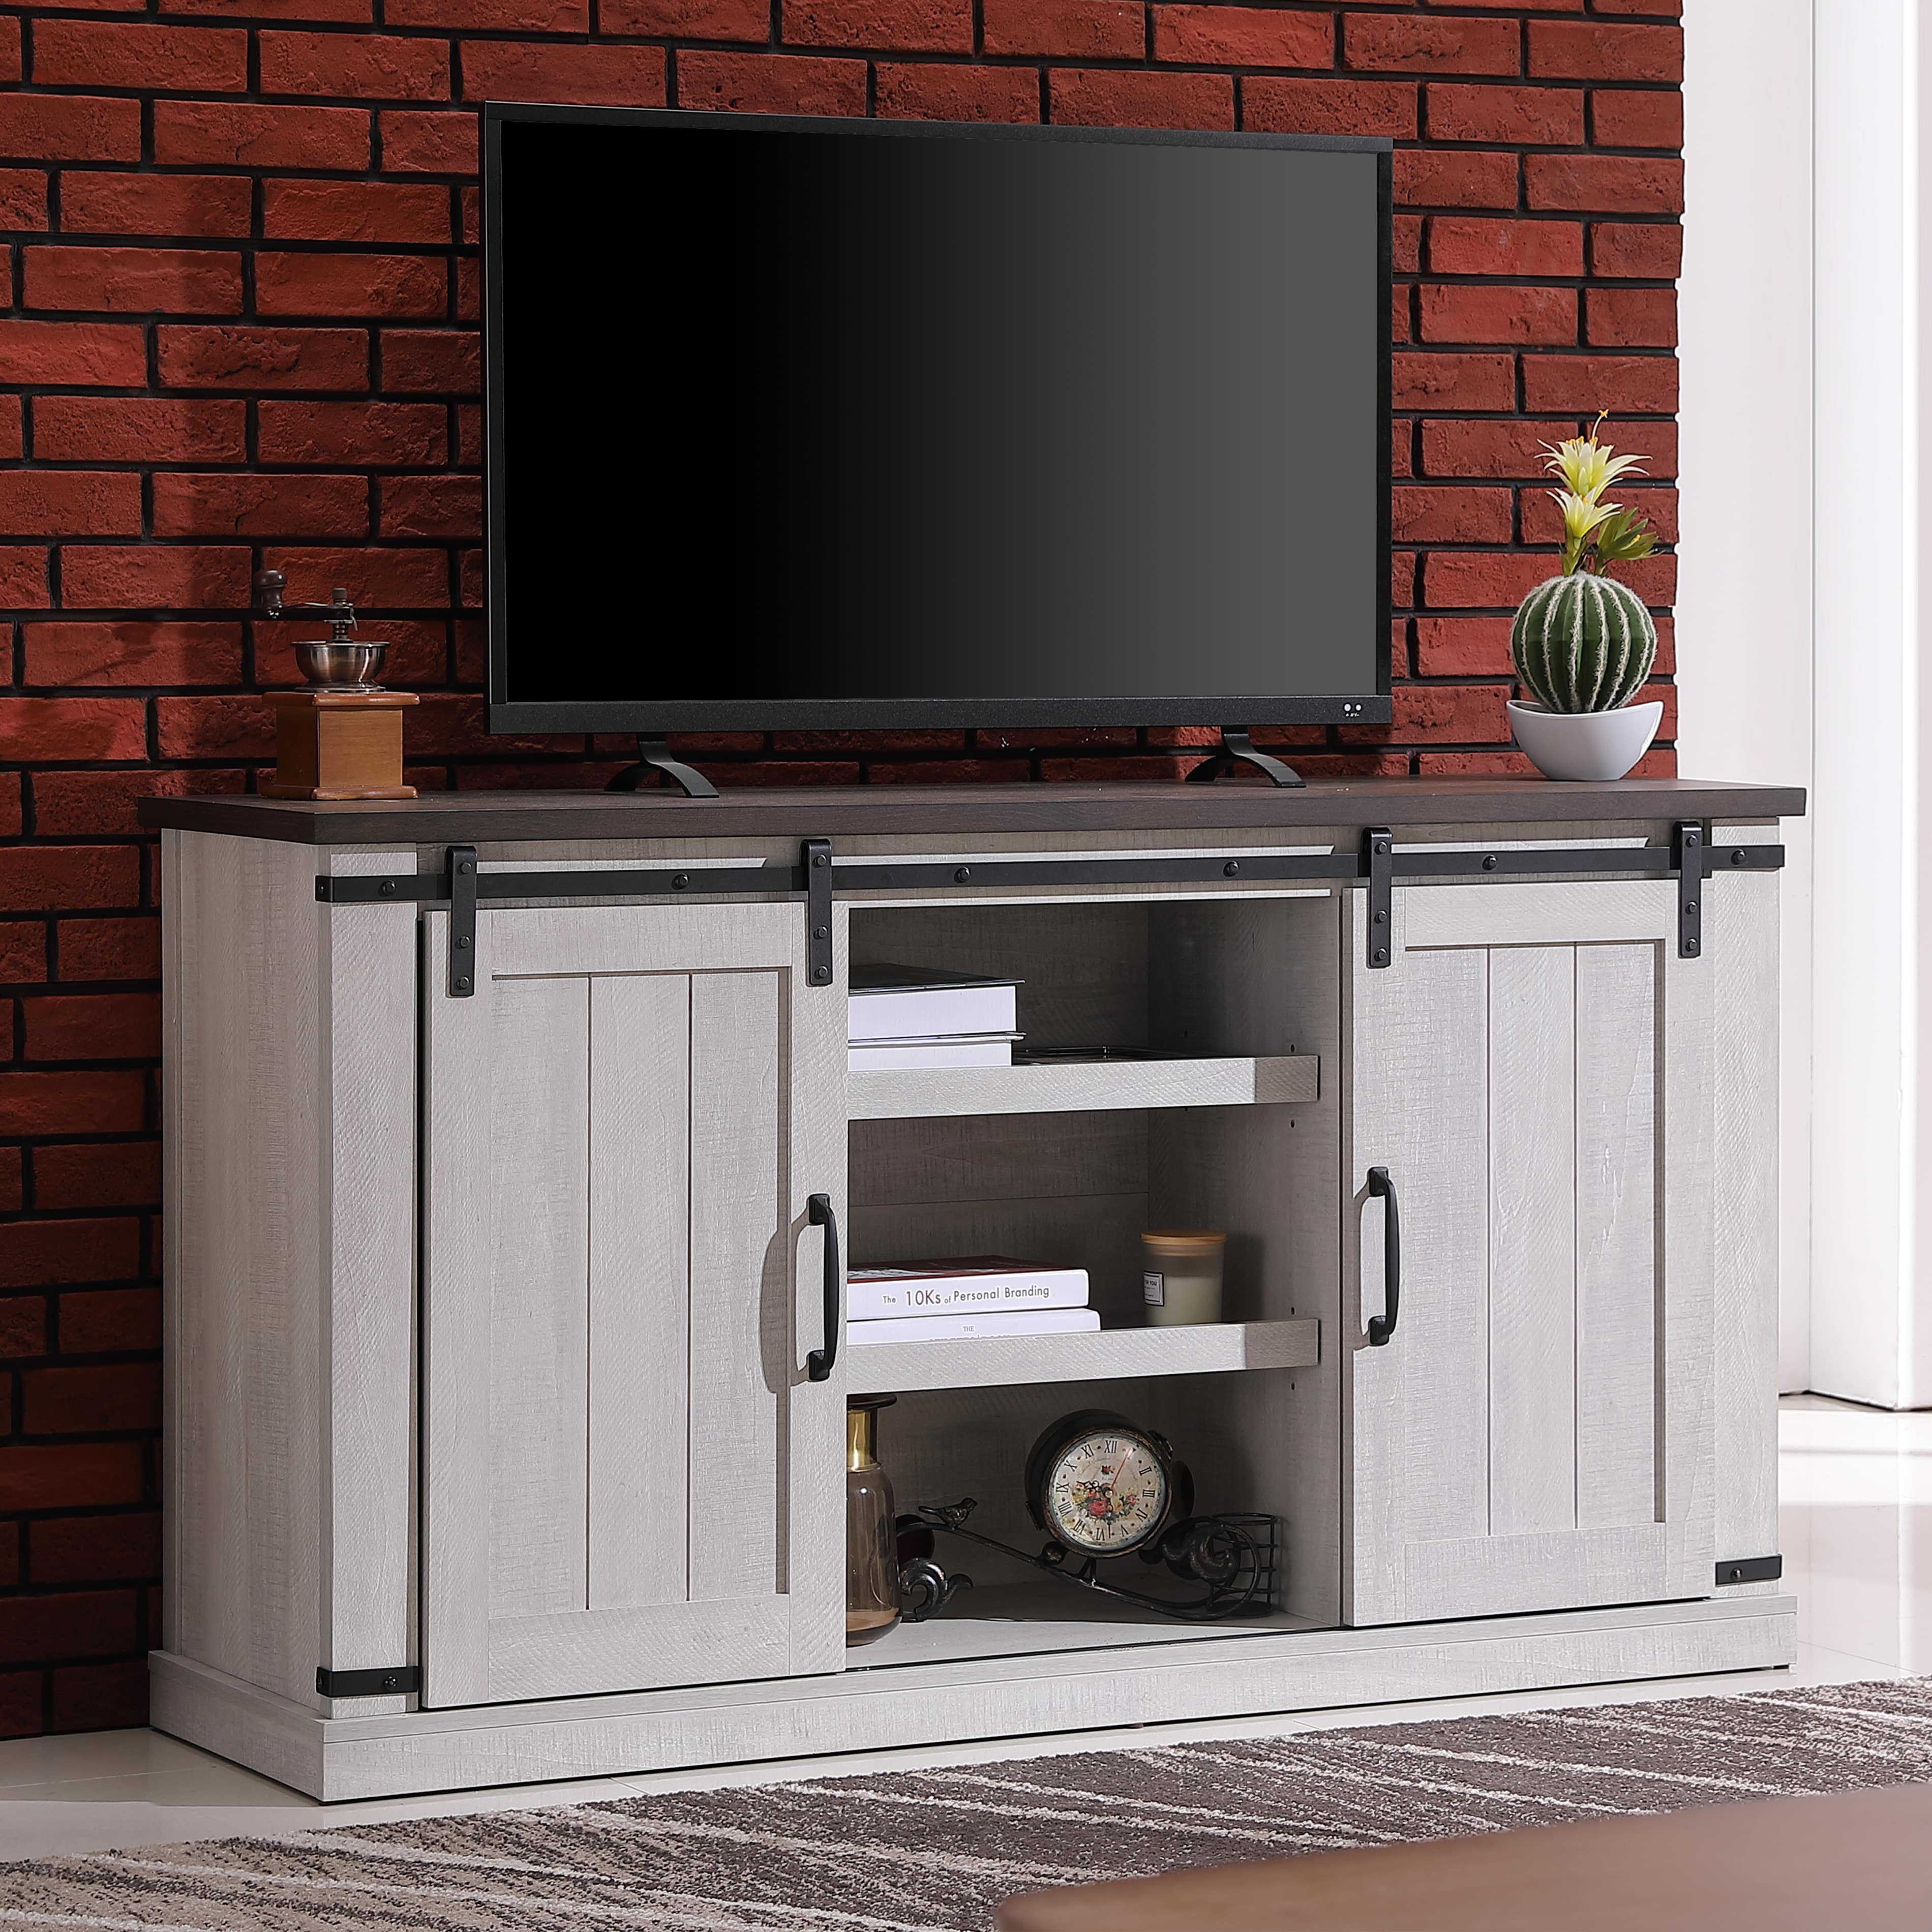 With Storage Doors Natural Wood Tv Stand Fits Tvs Up To 50 In Details about   Weston 47 In 